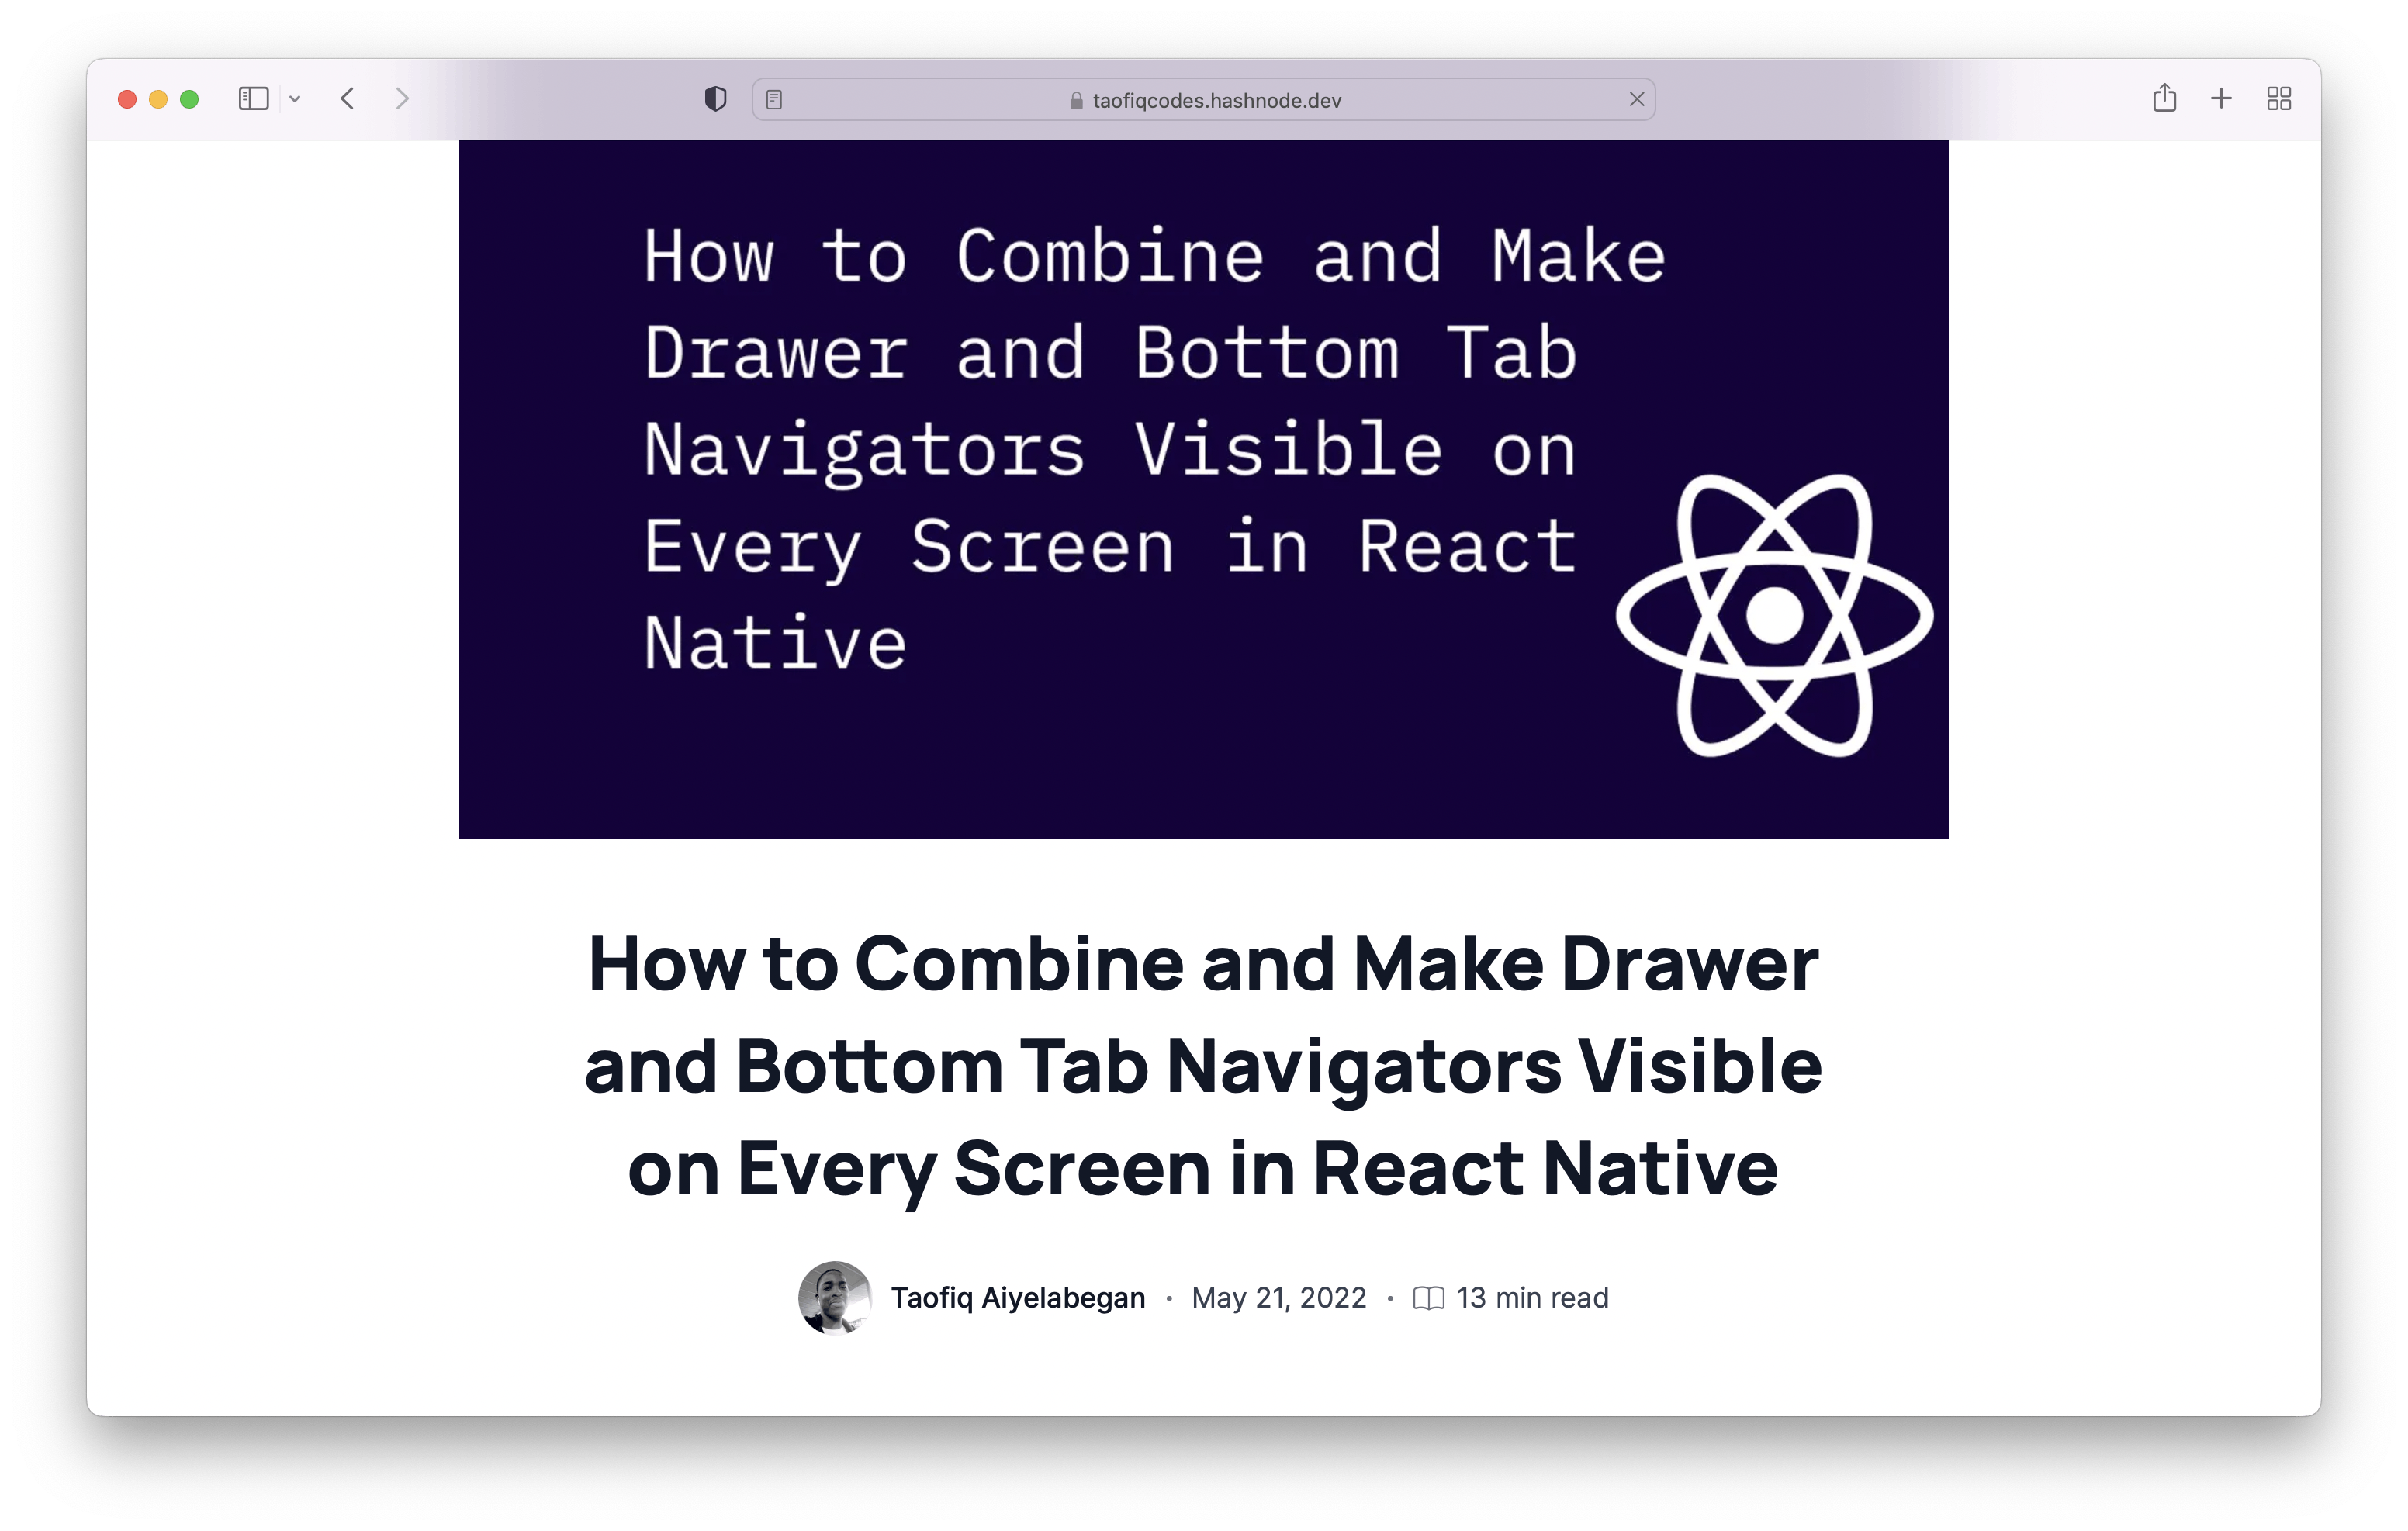 How to Combine and Make Drawer and Bottom Tab Navigators Visible on Every Screen in React Native